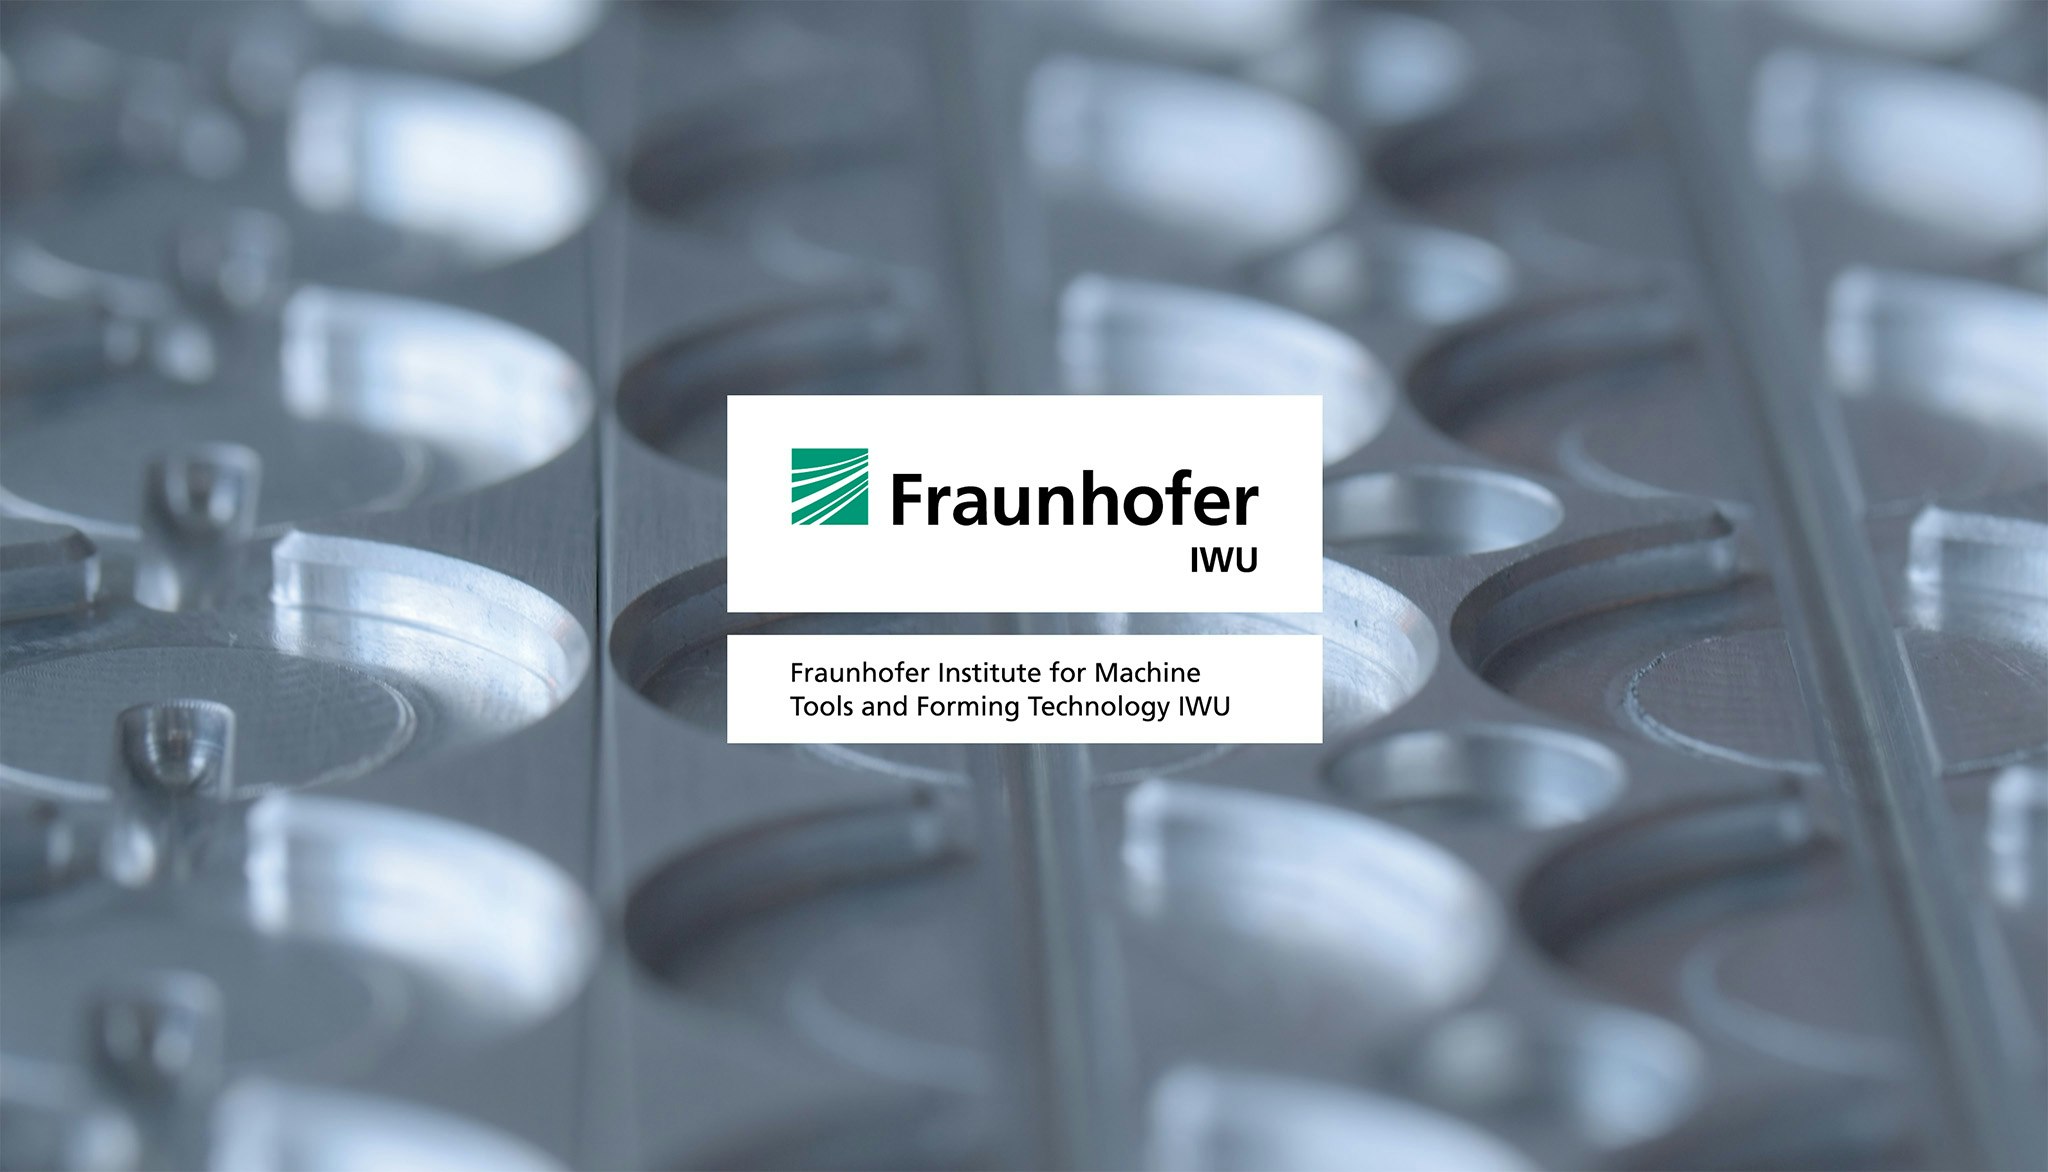 A z.truded EV battery pack with Fraunhofer